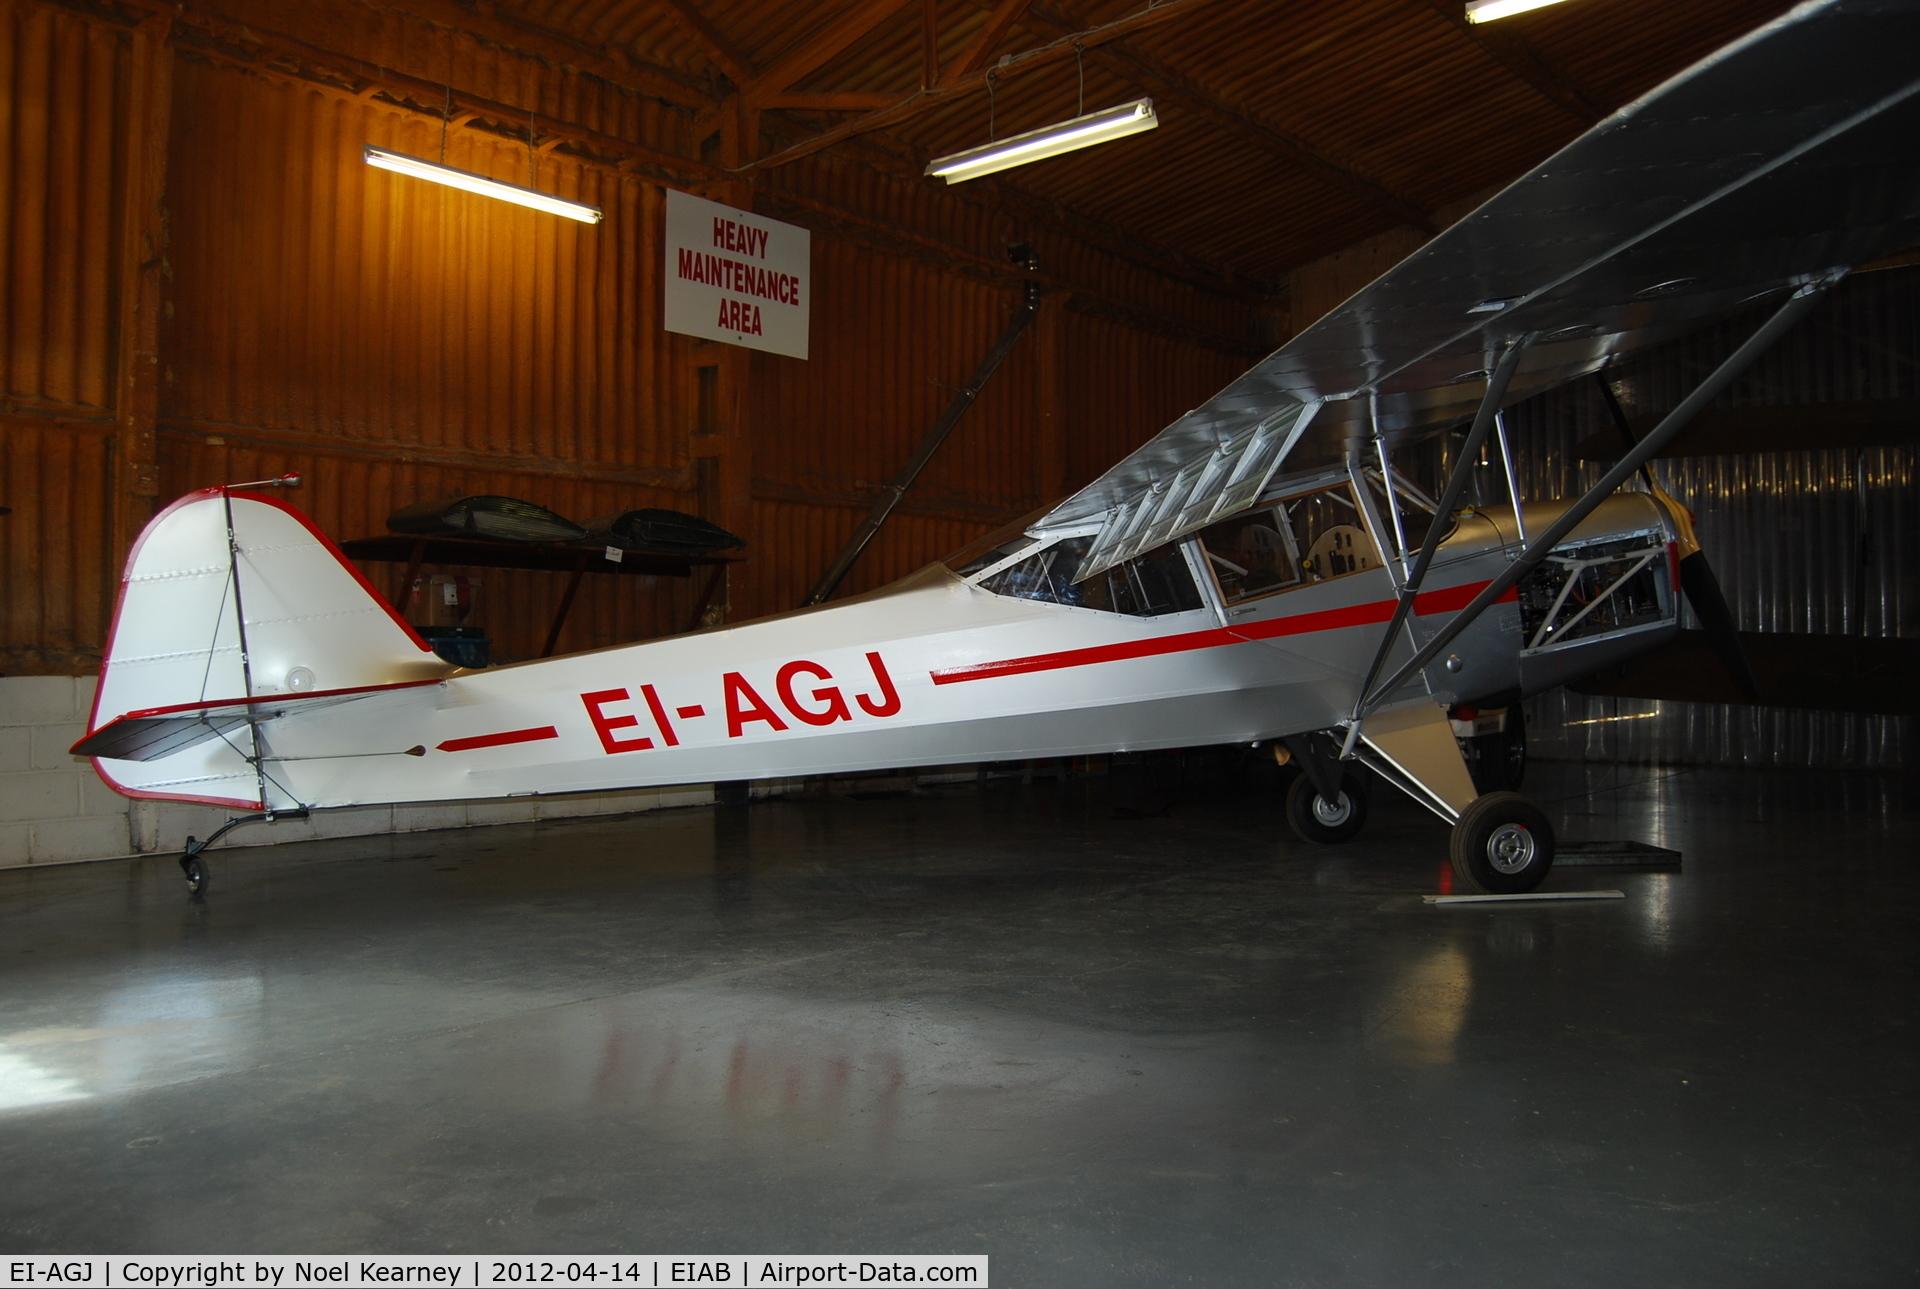 EI-AGJ, 1946 Auster 5J-1 Autocrat C/N 2208, Parked in the hanger at Abbeyshrule airfield.